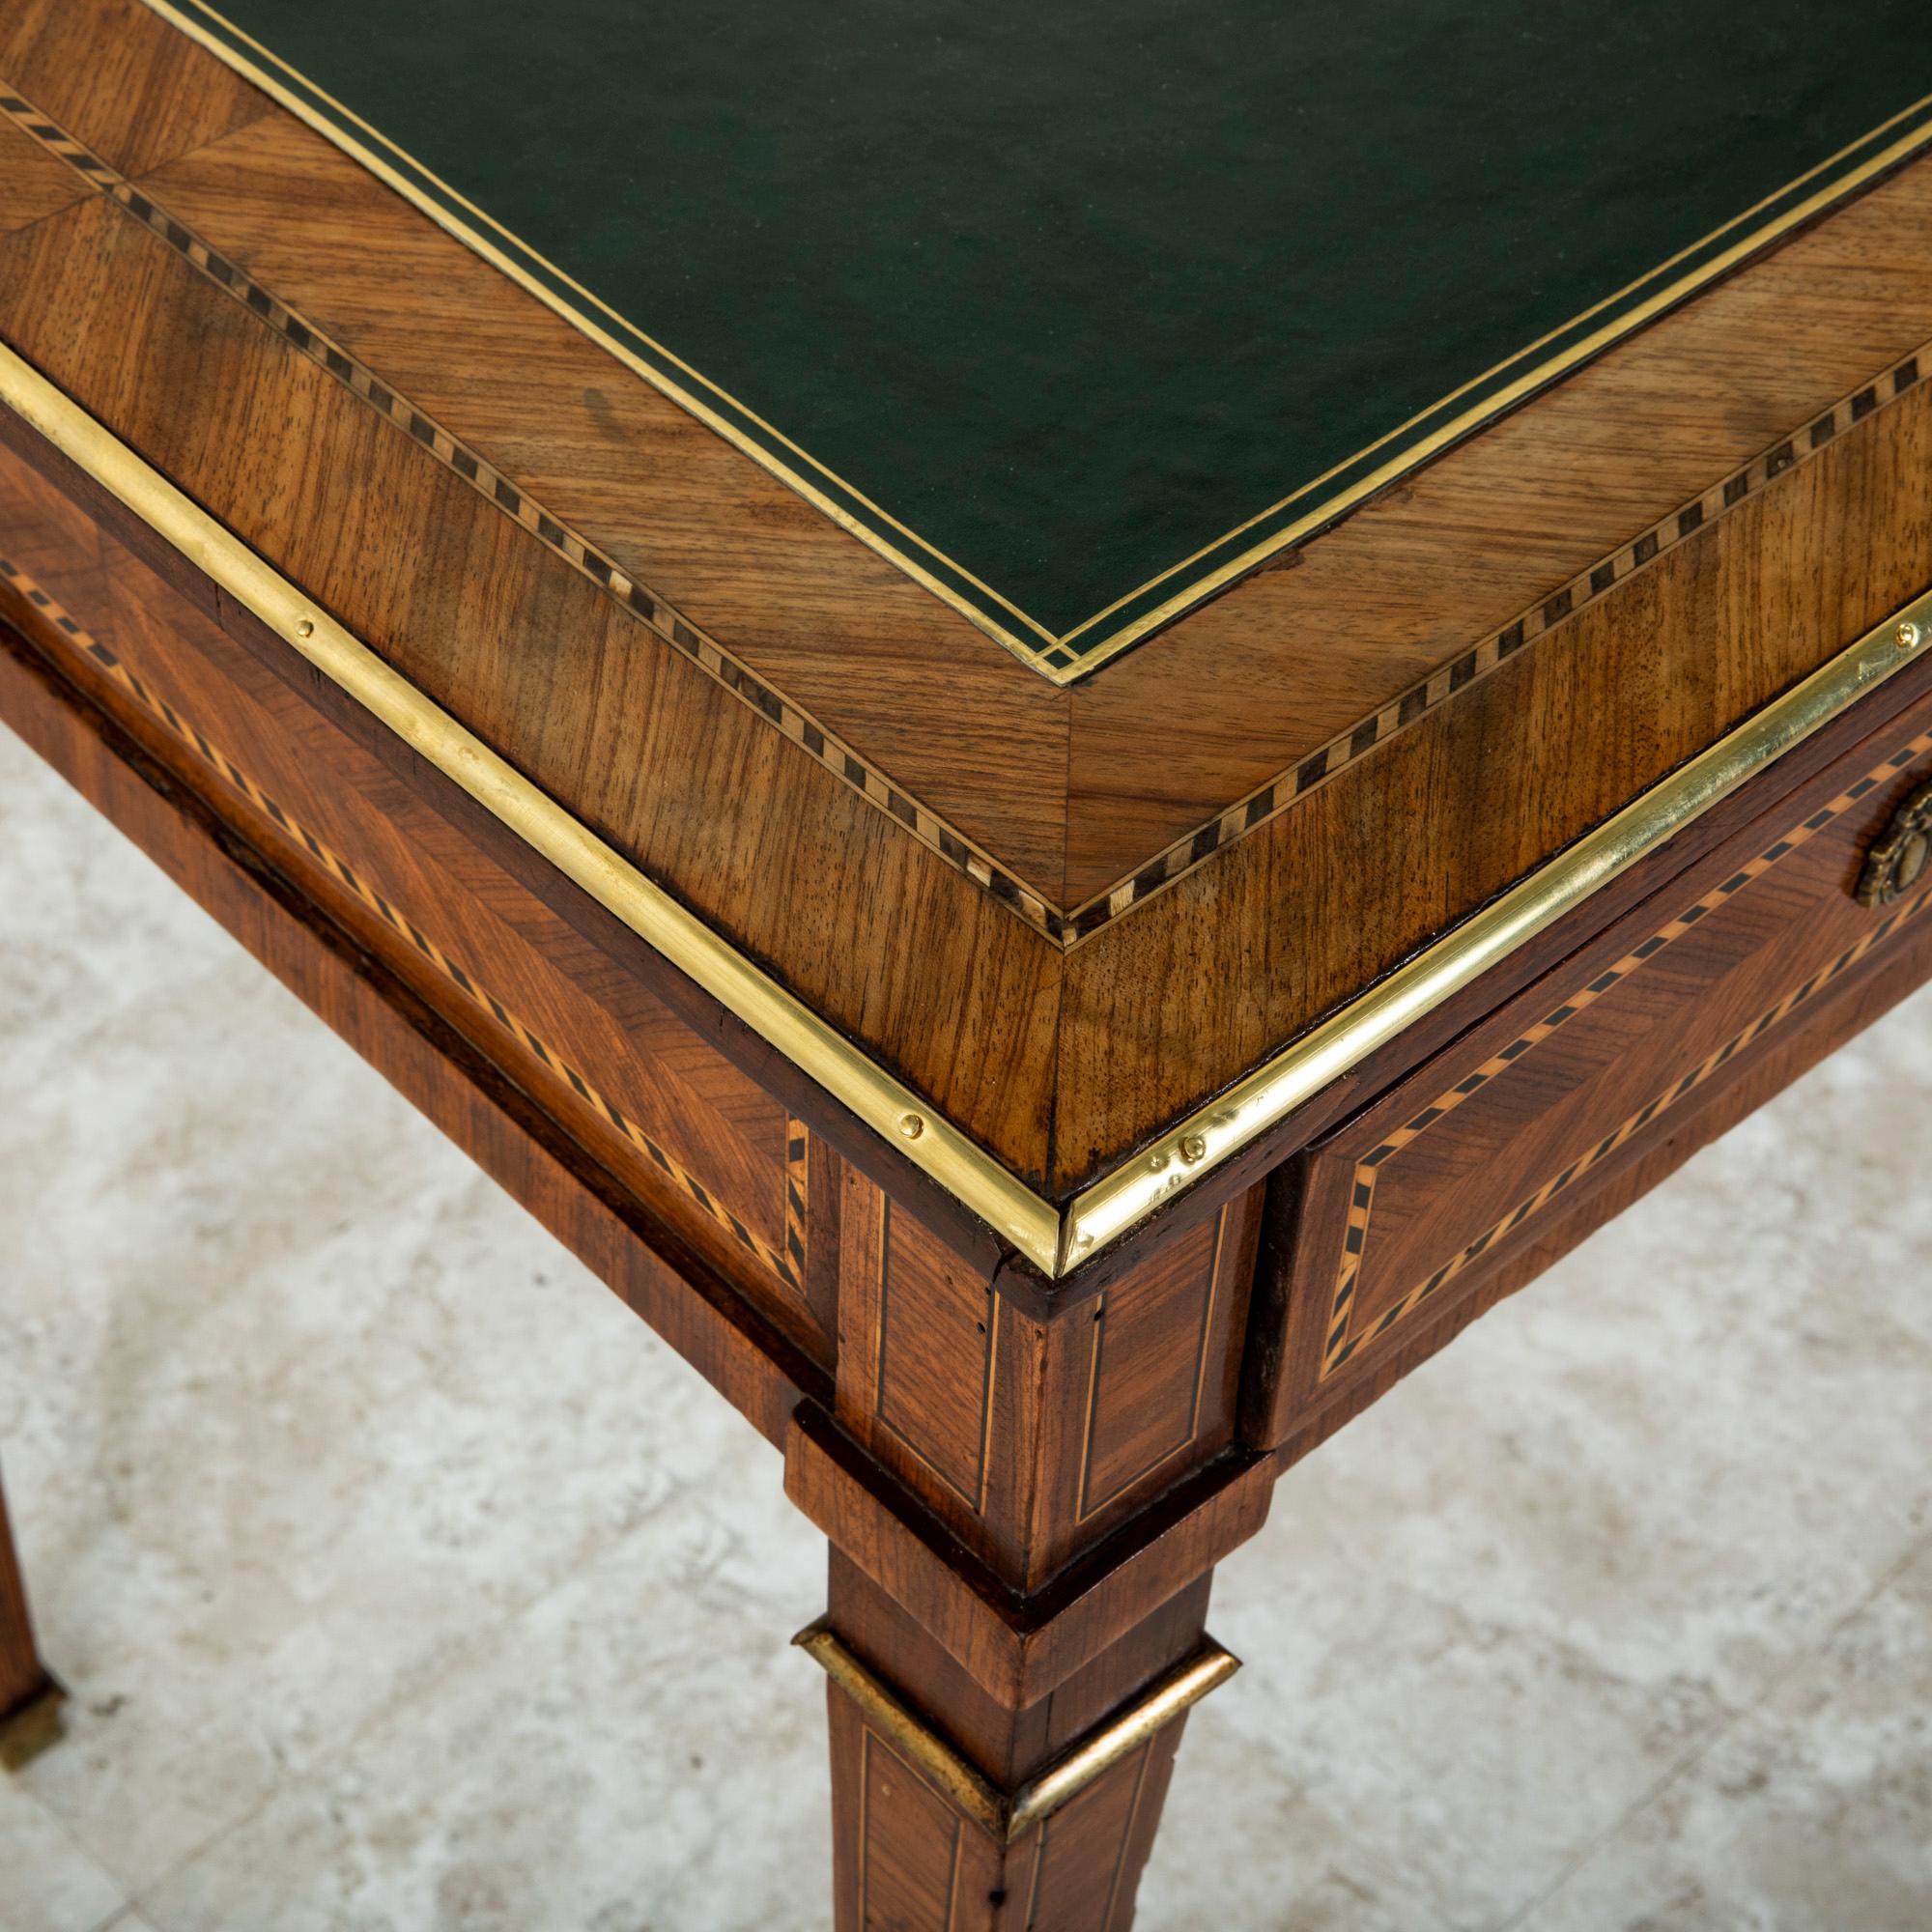 Late 18th Century French Louis XVI Period Marquetry Desk with Leather Top 9